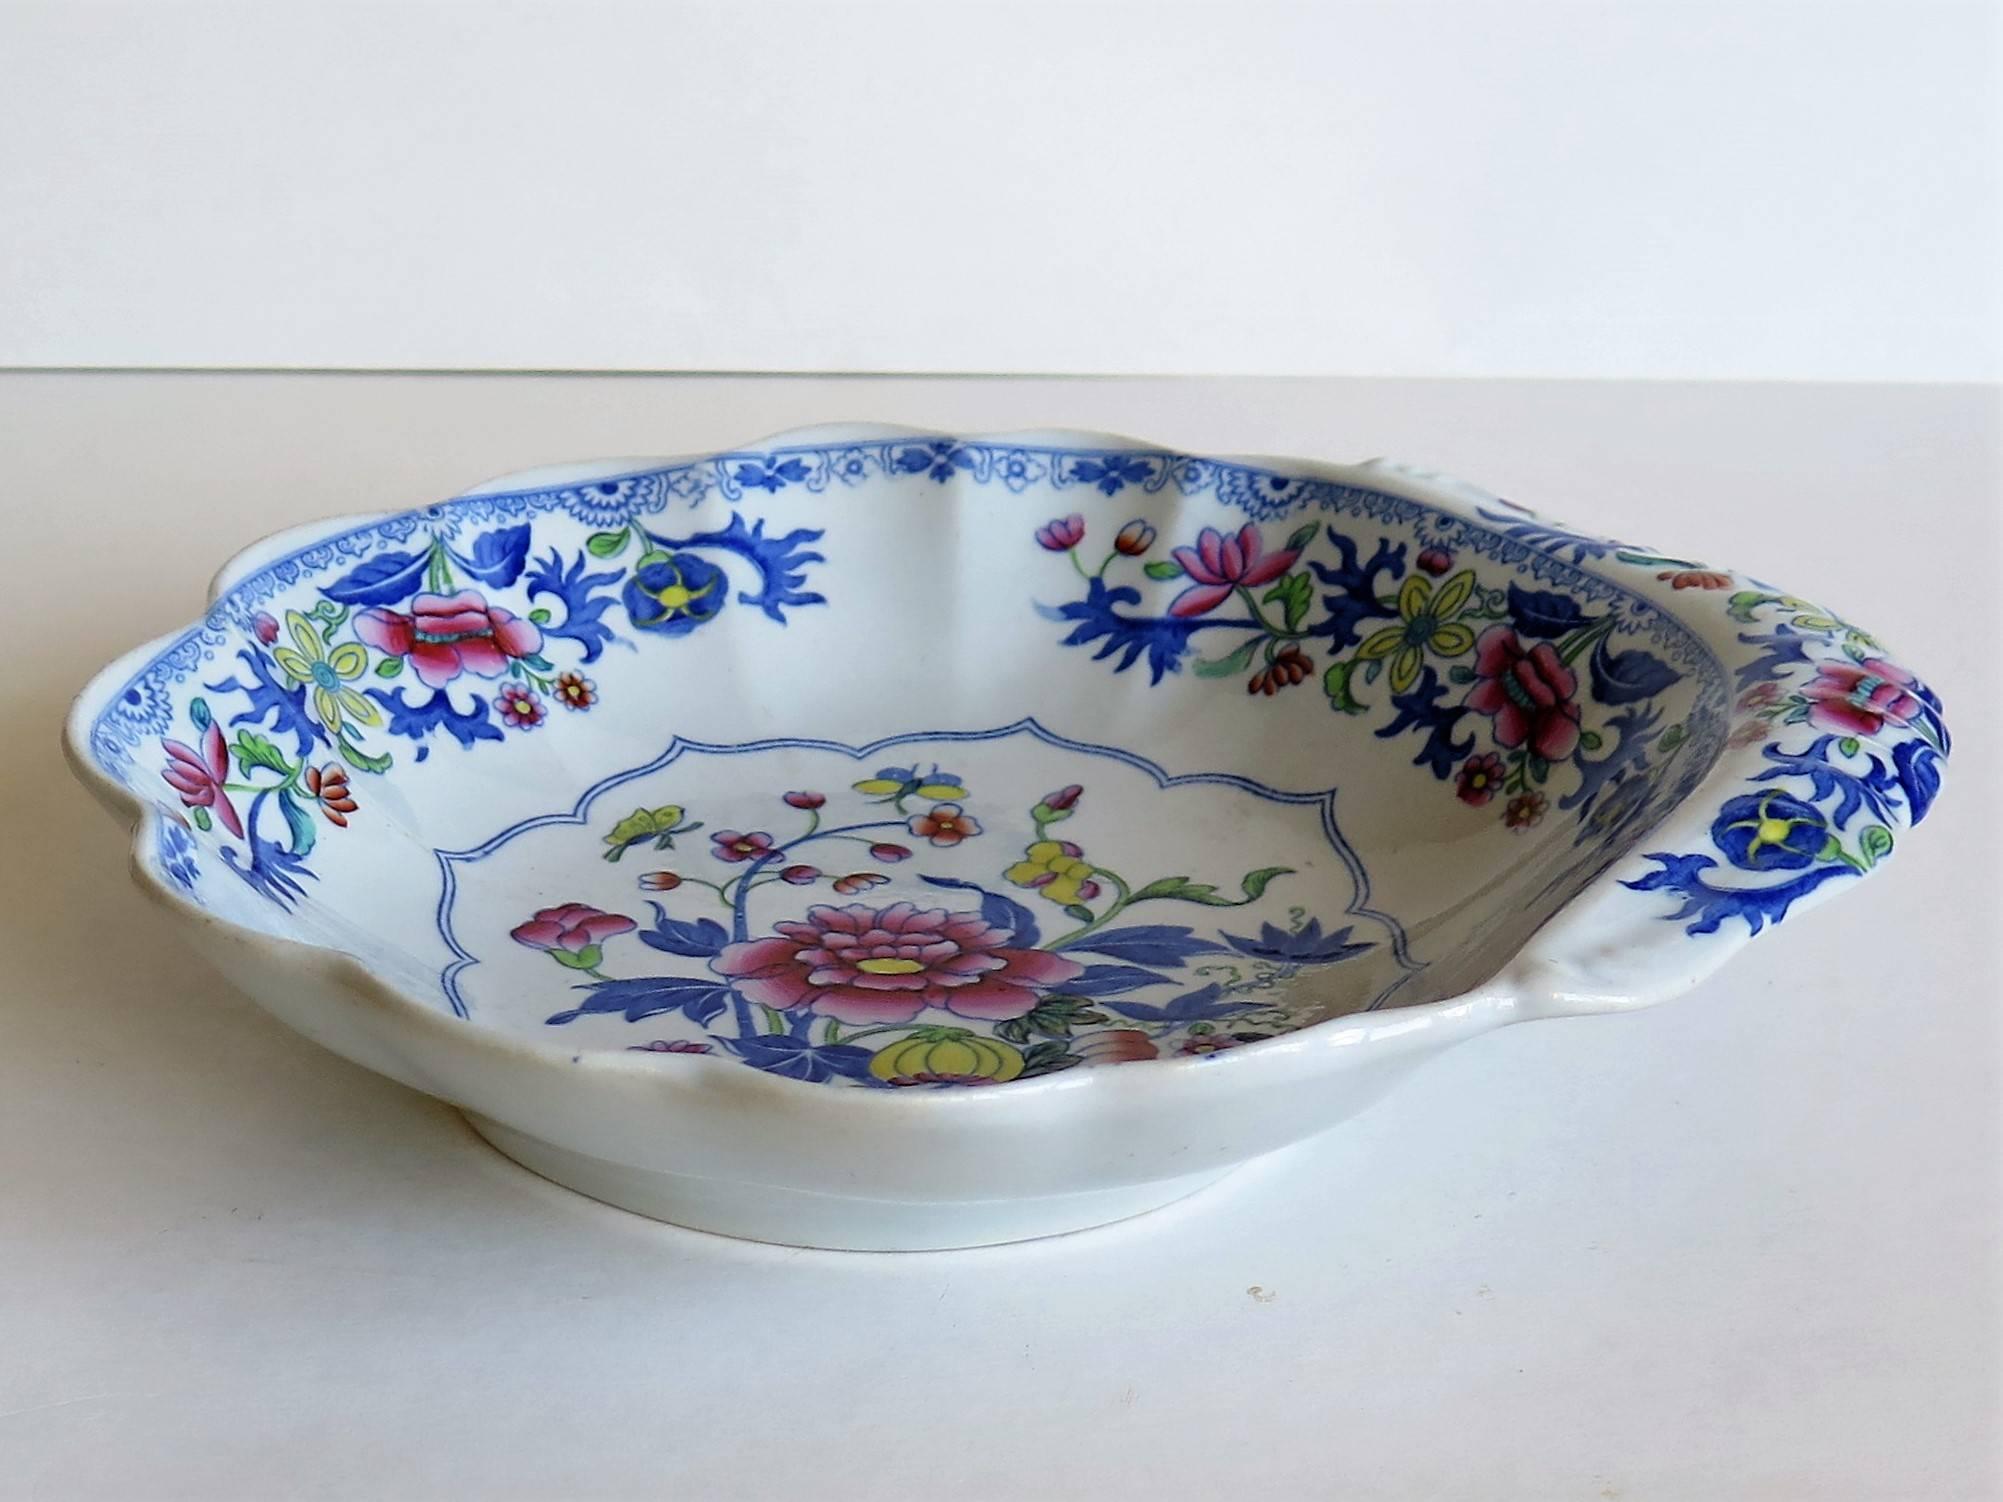 Chinoiserie Georgian Spode Ironstone Shell Dish or Plate Bang Up Pattern No. 2886, Ca 1820 For Sale